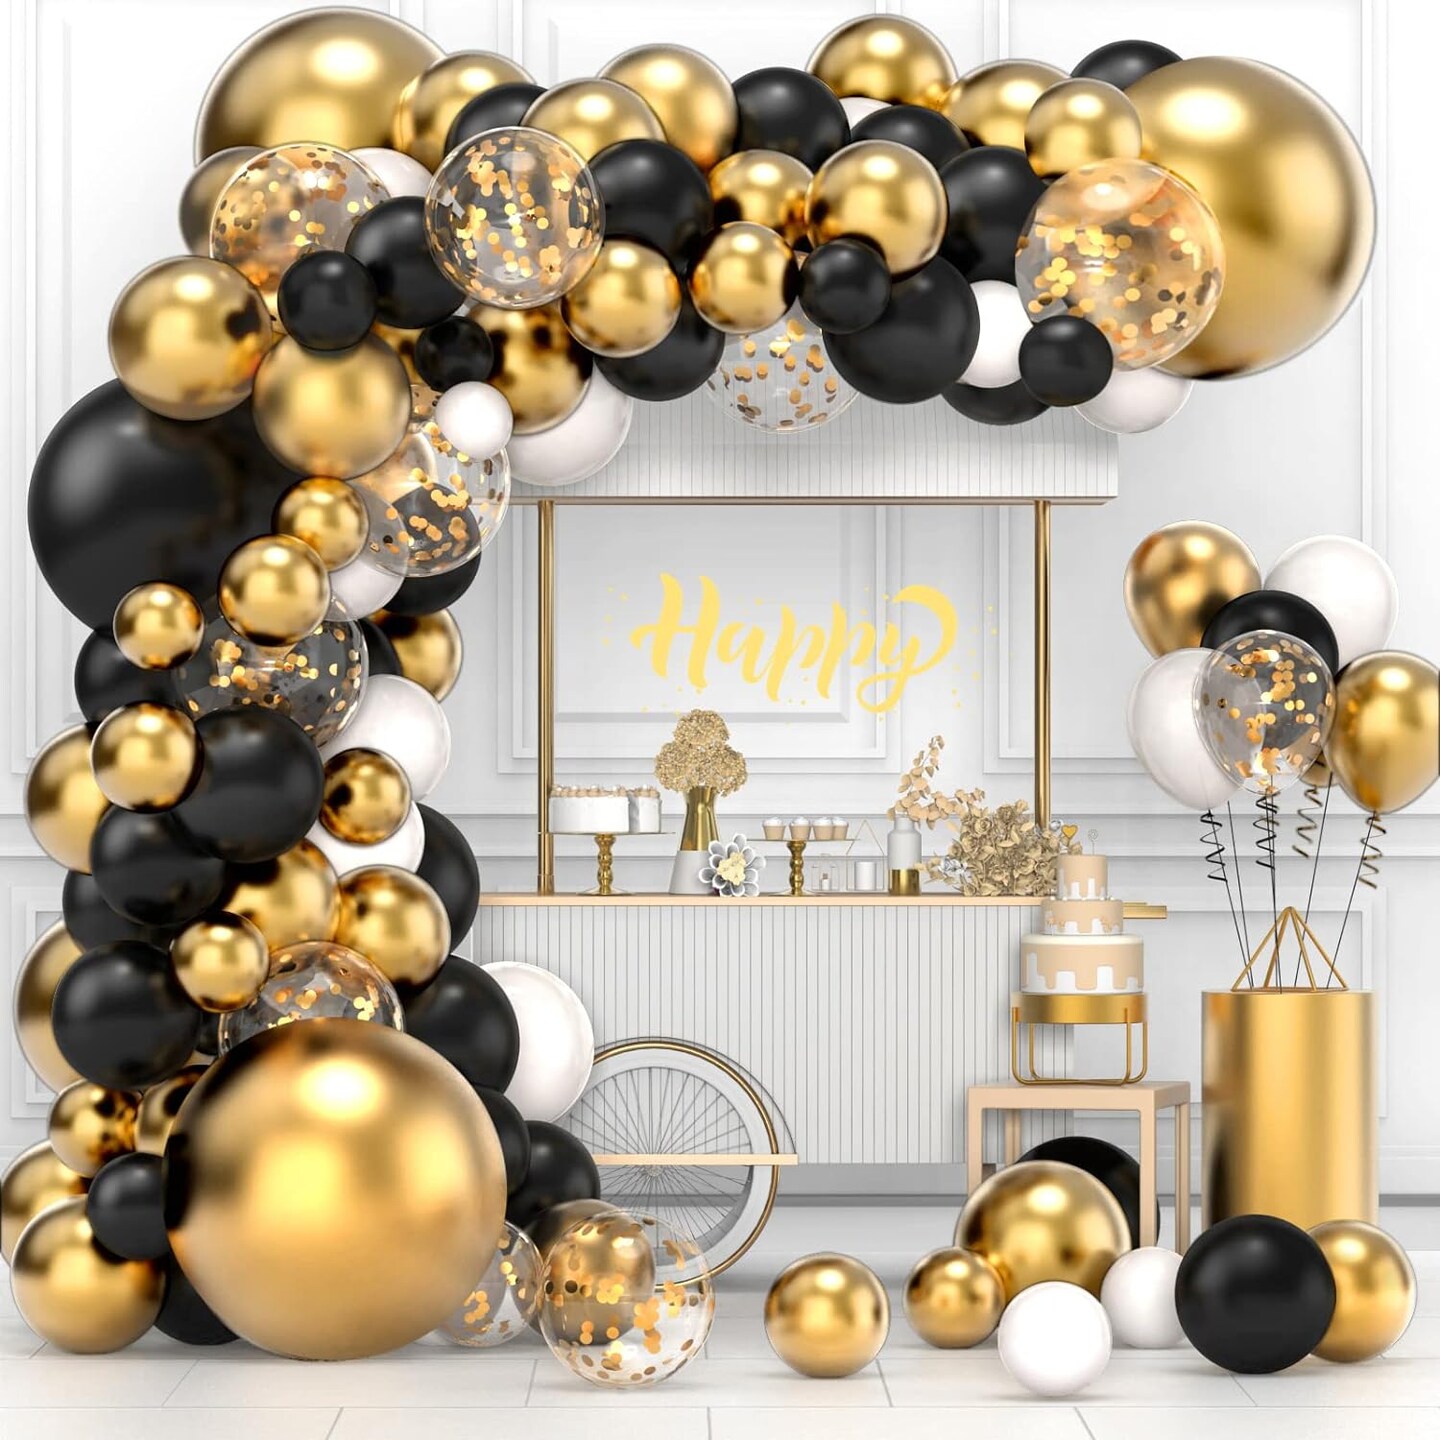 126pcs Black and Gold Balloons Garland Arch Kit, Black Metallic Gold White and Gold Confetti Balloons with Balloon Strip for Graduation Anniversary Birthday Black Gold Party Decorations